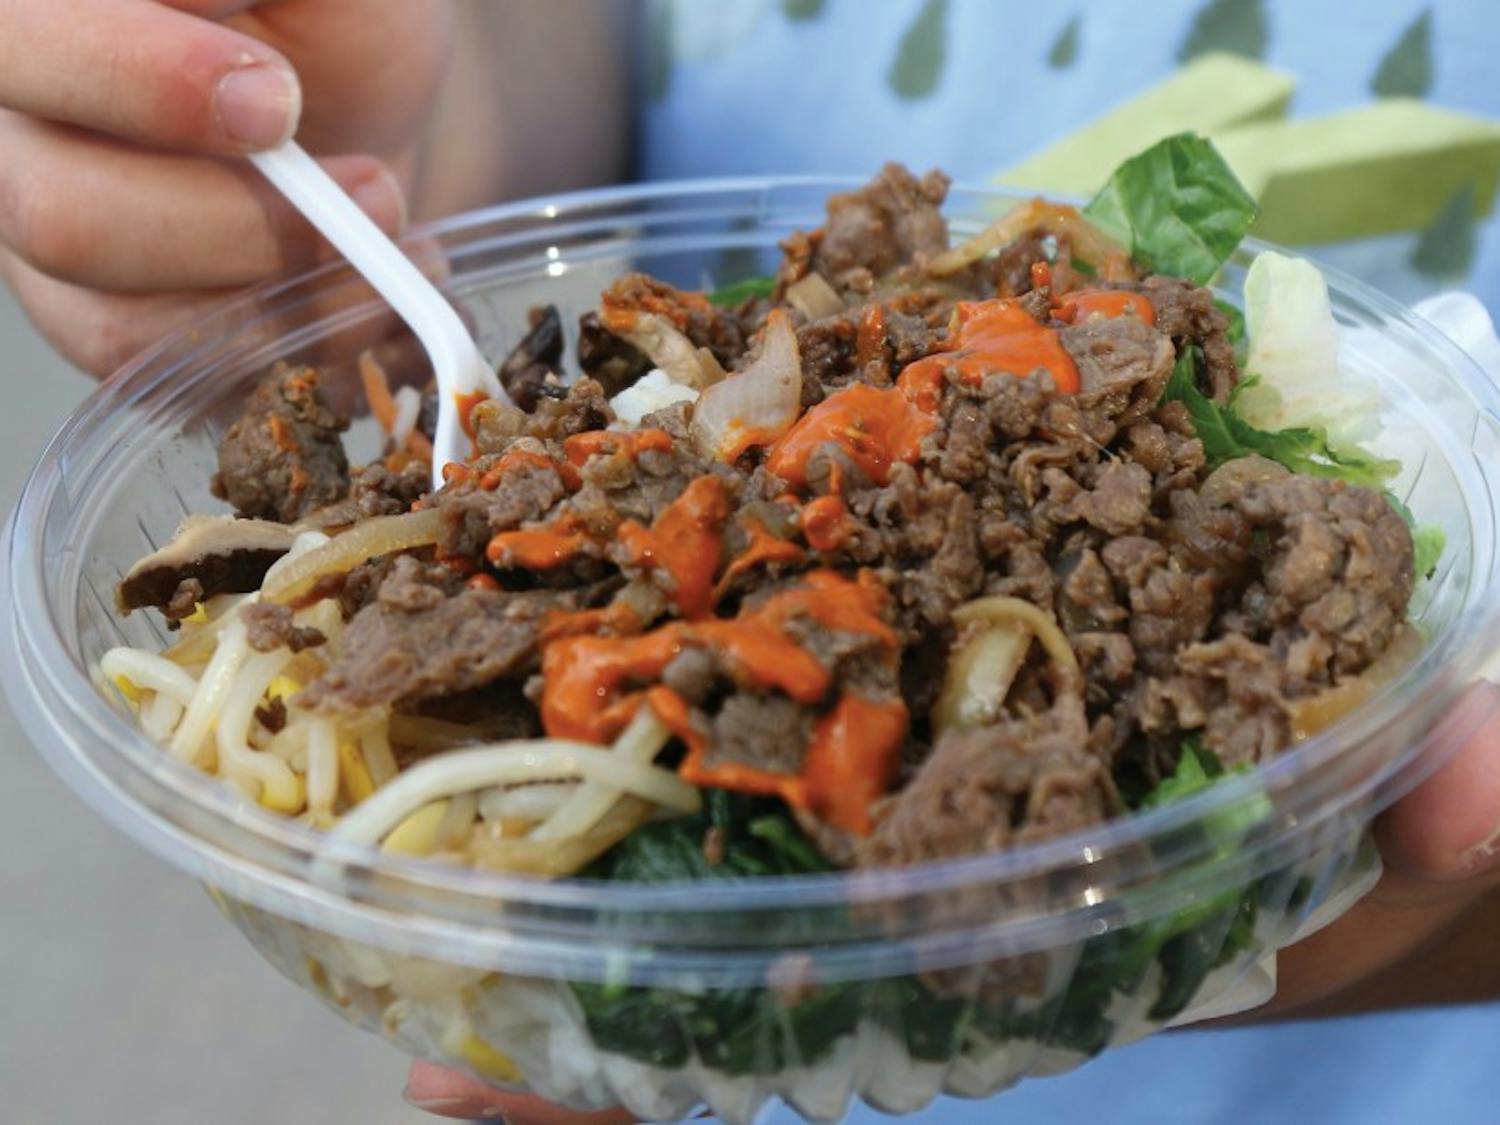 The latest addition to the food truck lineup serves bibimbap, soy-marinated “ugly wings” and much more.